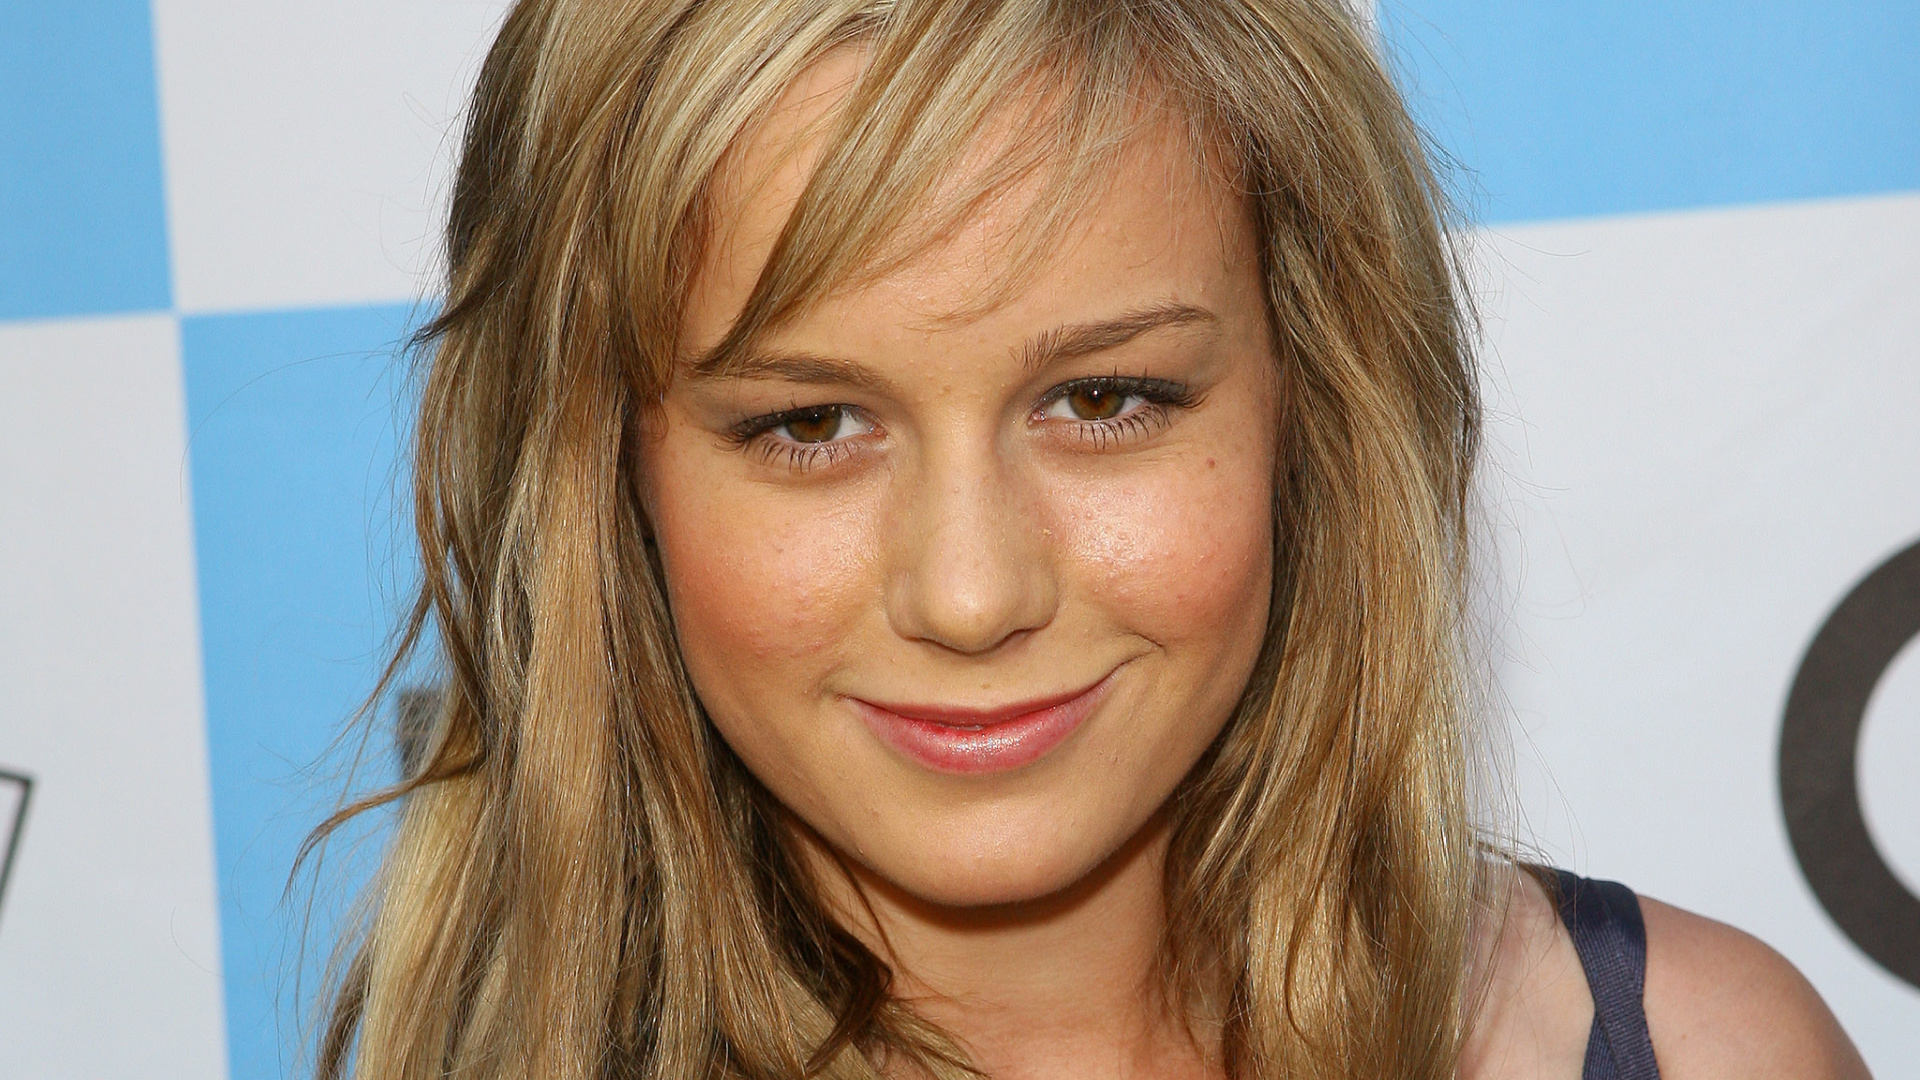 Brie Larson, unrecognizable! See the actors before they became superheroes